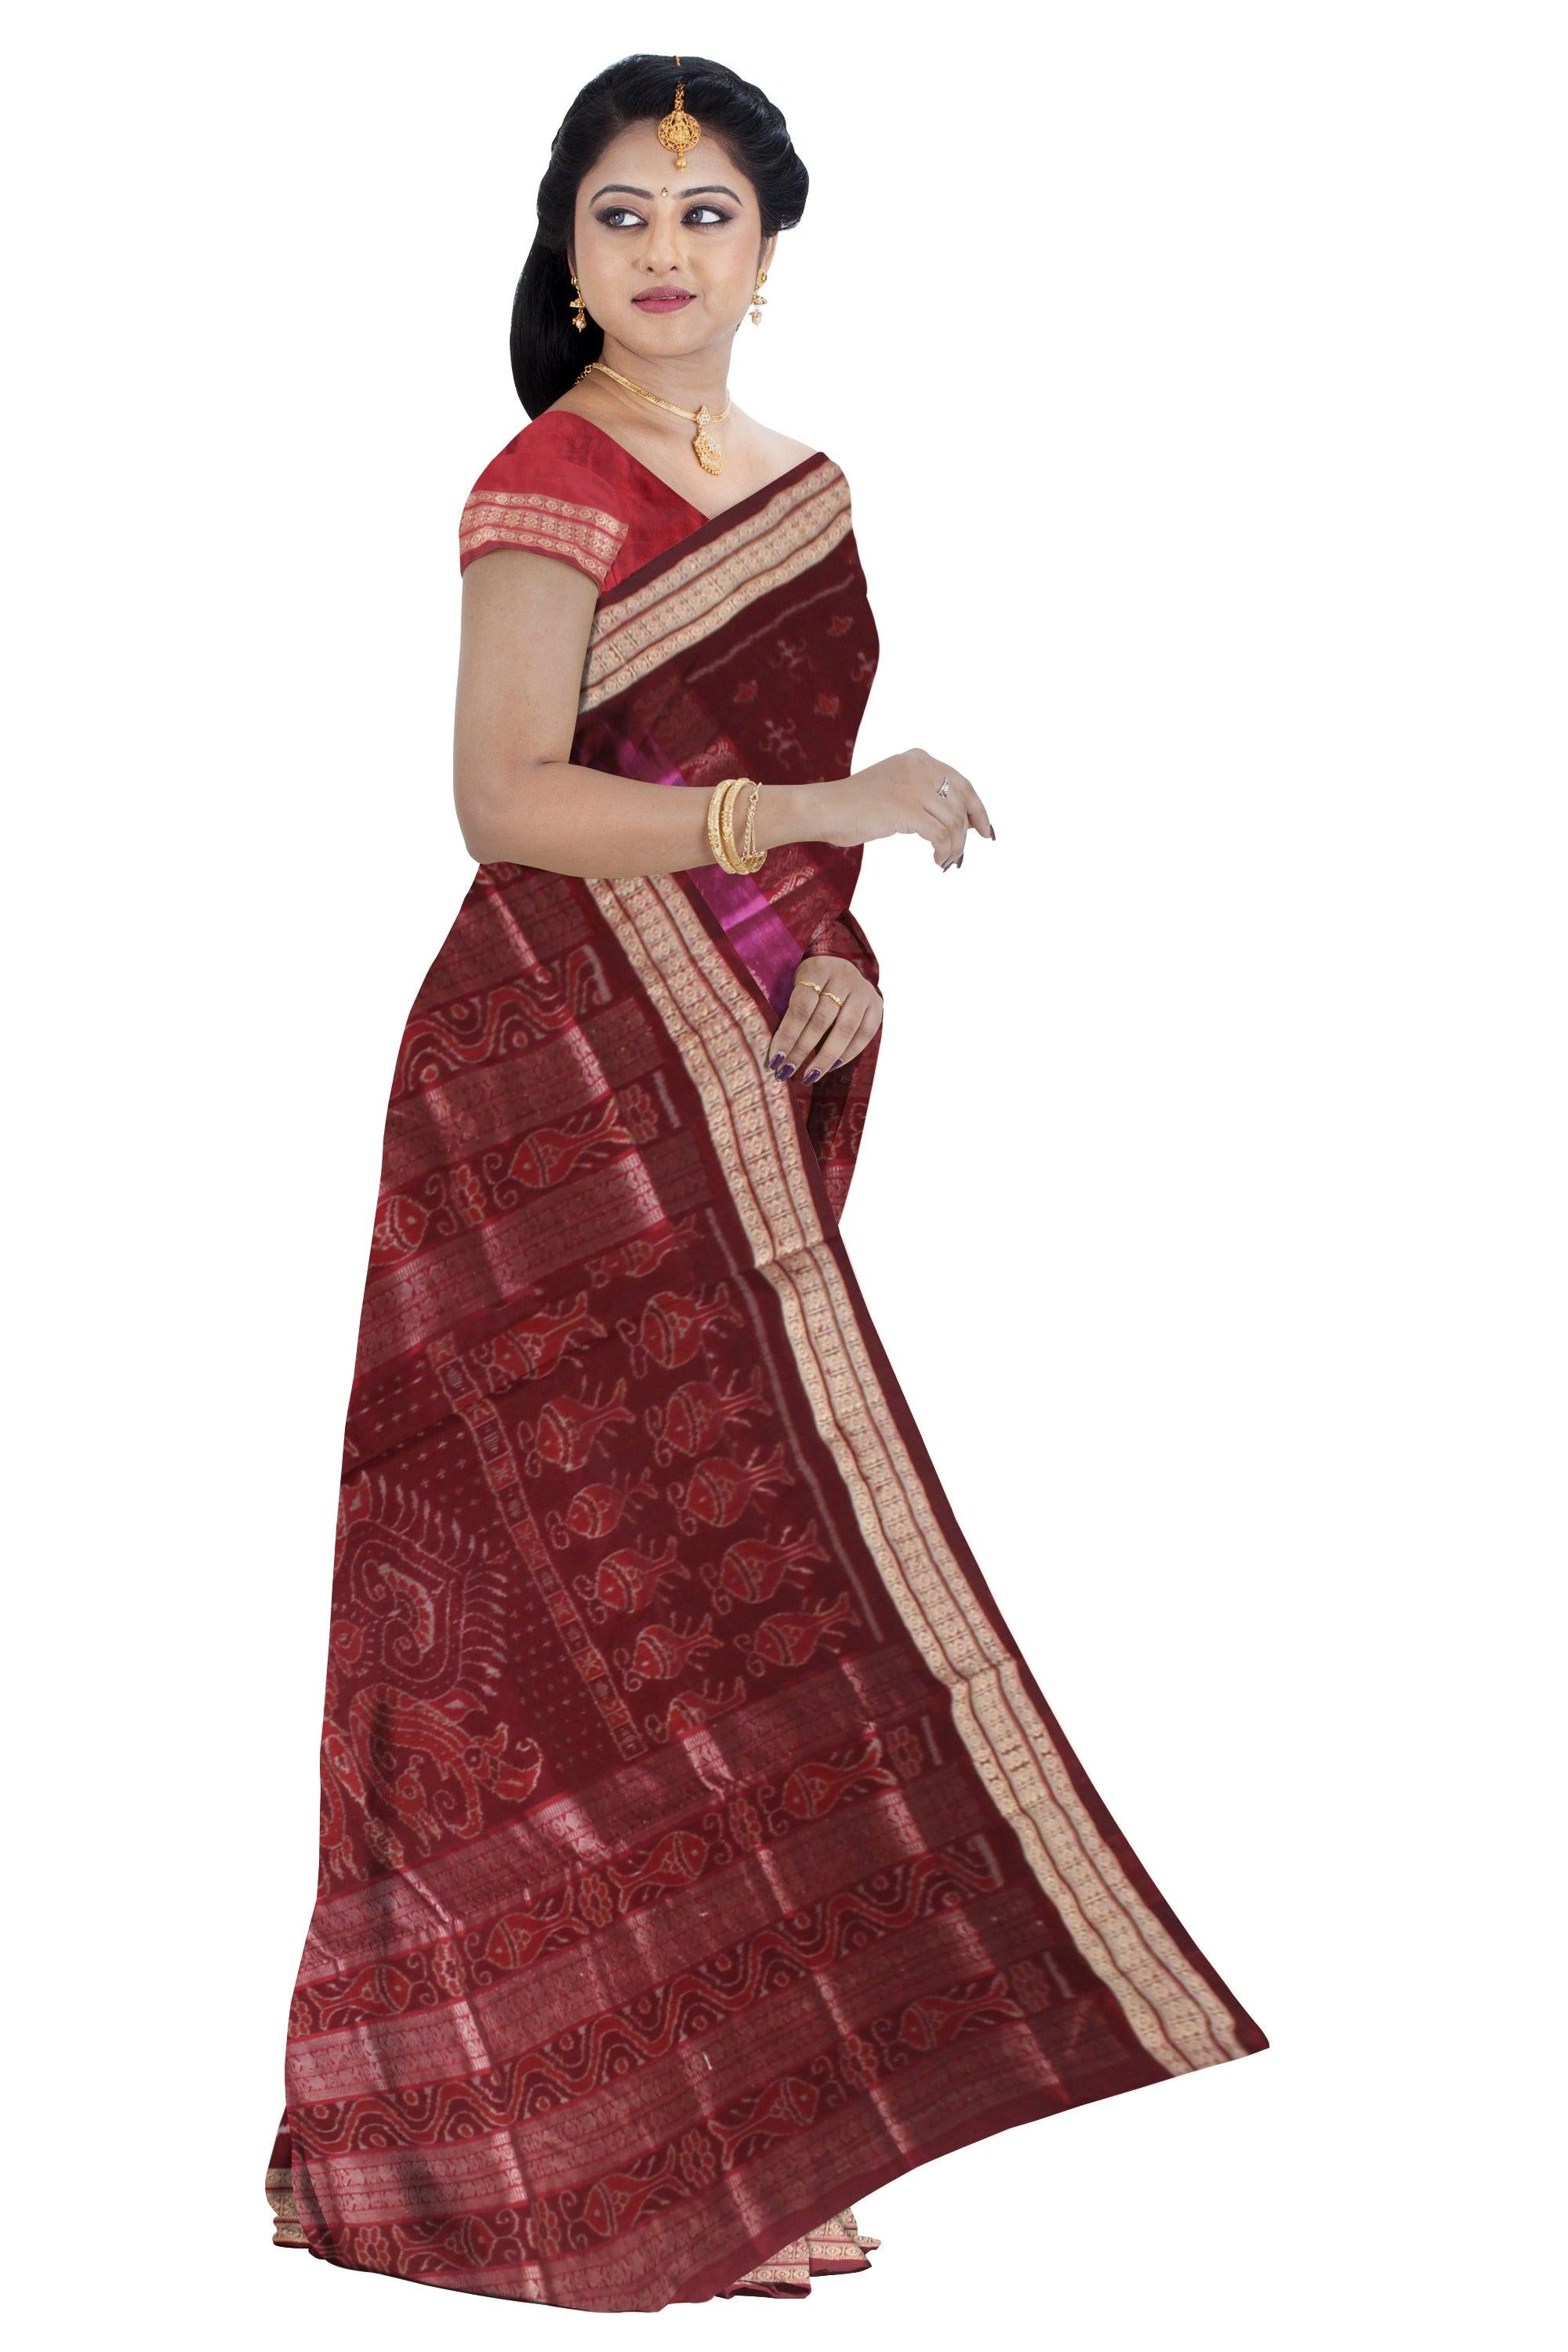 Pink Color  Mix Pata saree in bomkai pattern and Flower in Body  with blouse piece. - Koshali Arts & Crafts Enterprise